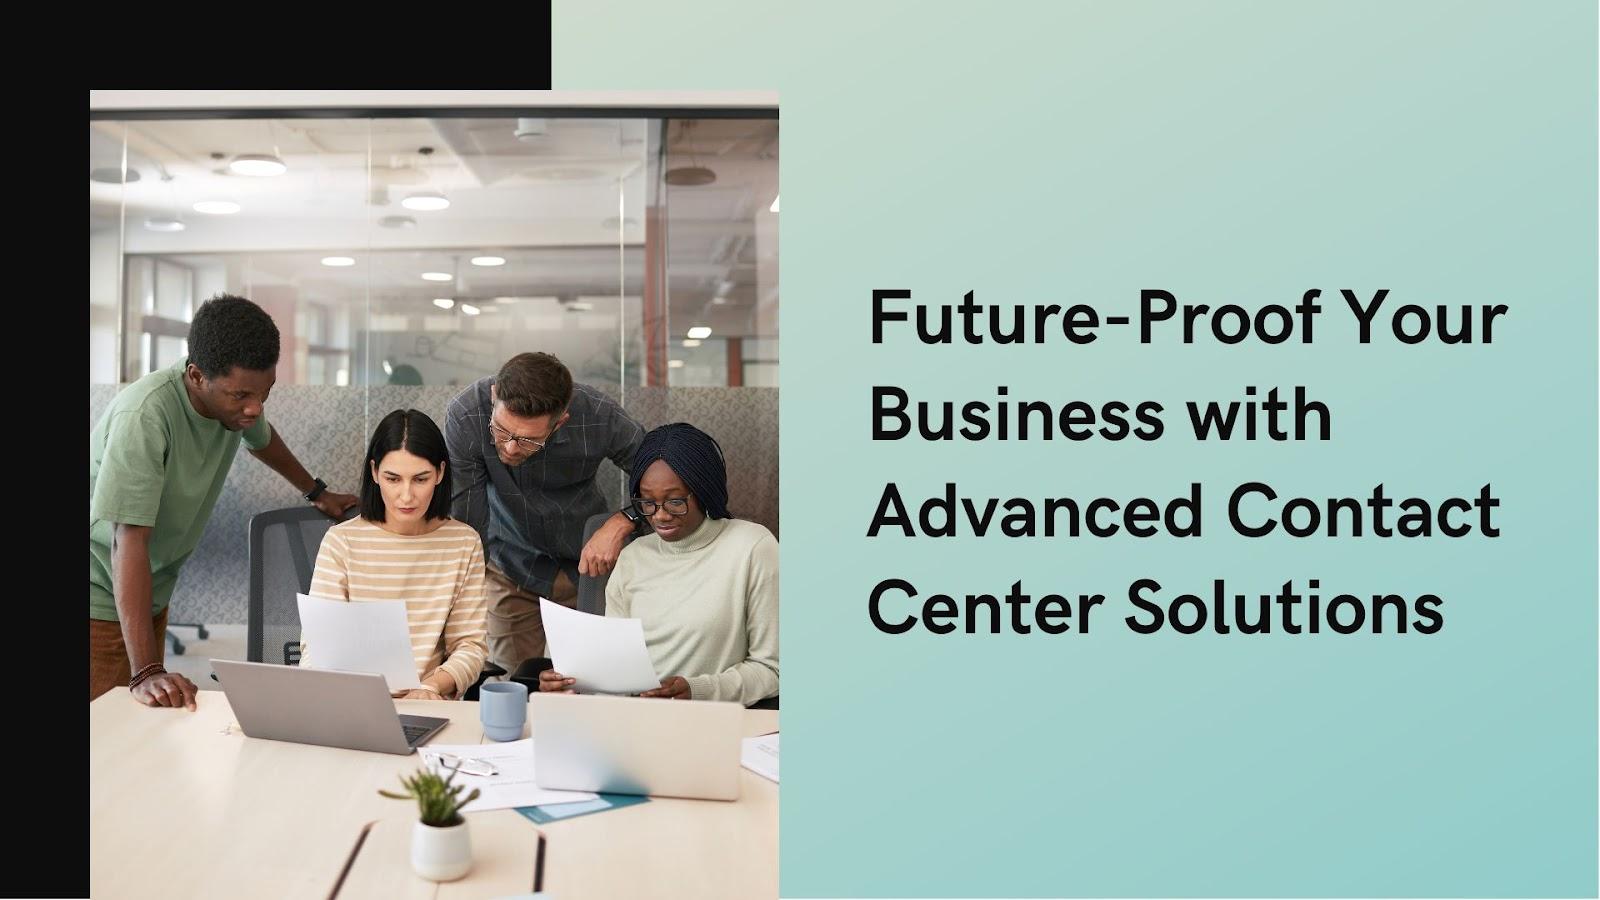 Future-Proof Your Business with Advanced Contact Center Solutions